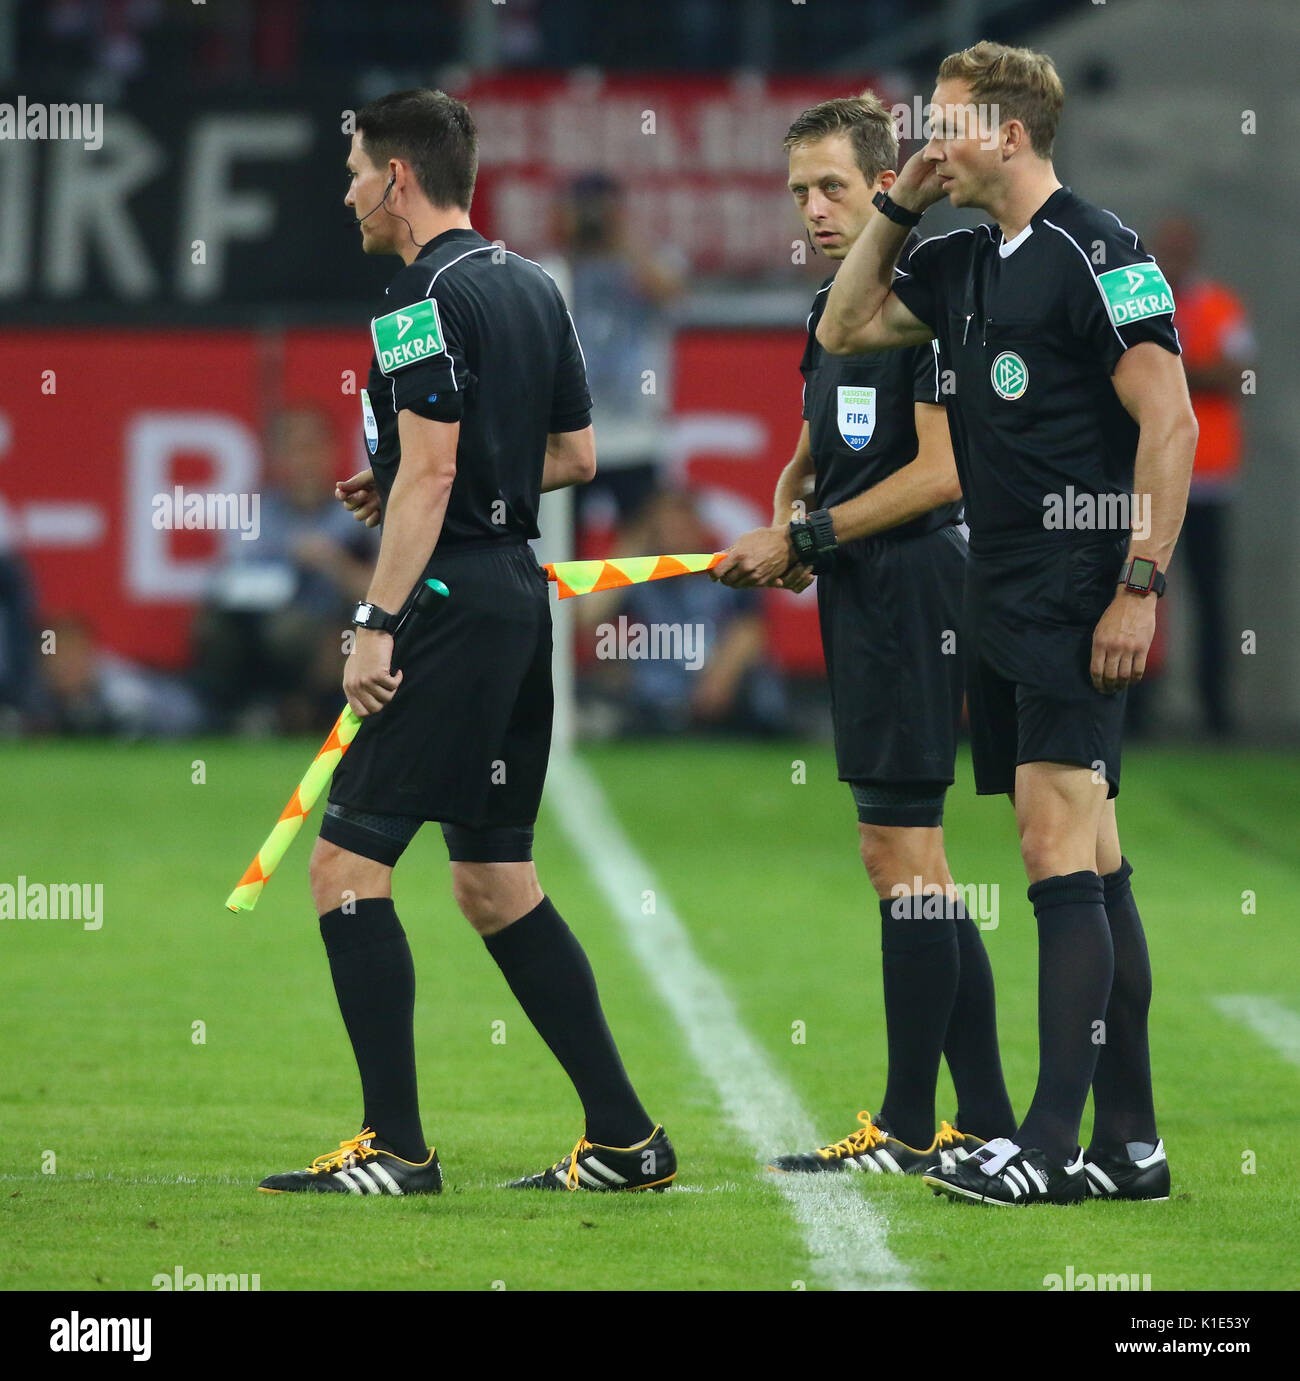 Cologne, Germany, August 25 2017, Bundesliga matchday 2, 1. FC Koeln - Hamburger SV: Fourth referee Soeren Storcks takes over (R) when he replaces Felix Brych who left the pitch, assistents are Mark Borsch (C) and Stefan Lupp.            Credit: Juergen Schwarz/Alamy Live News Stock Photo